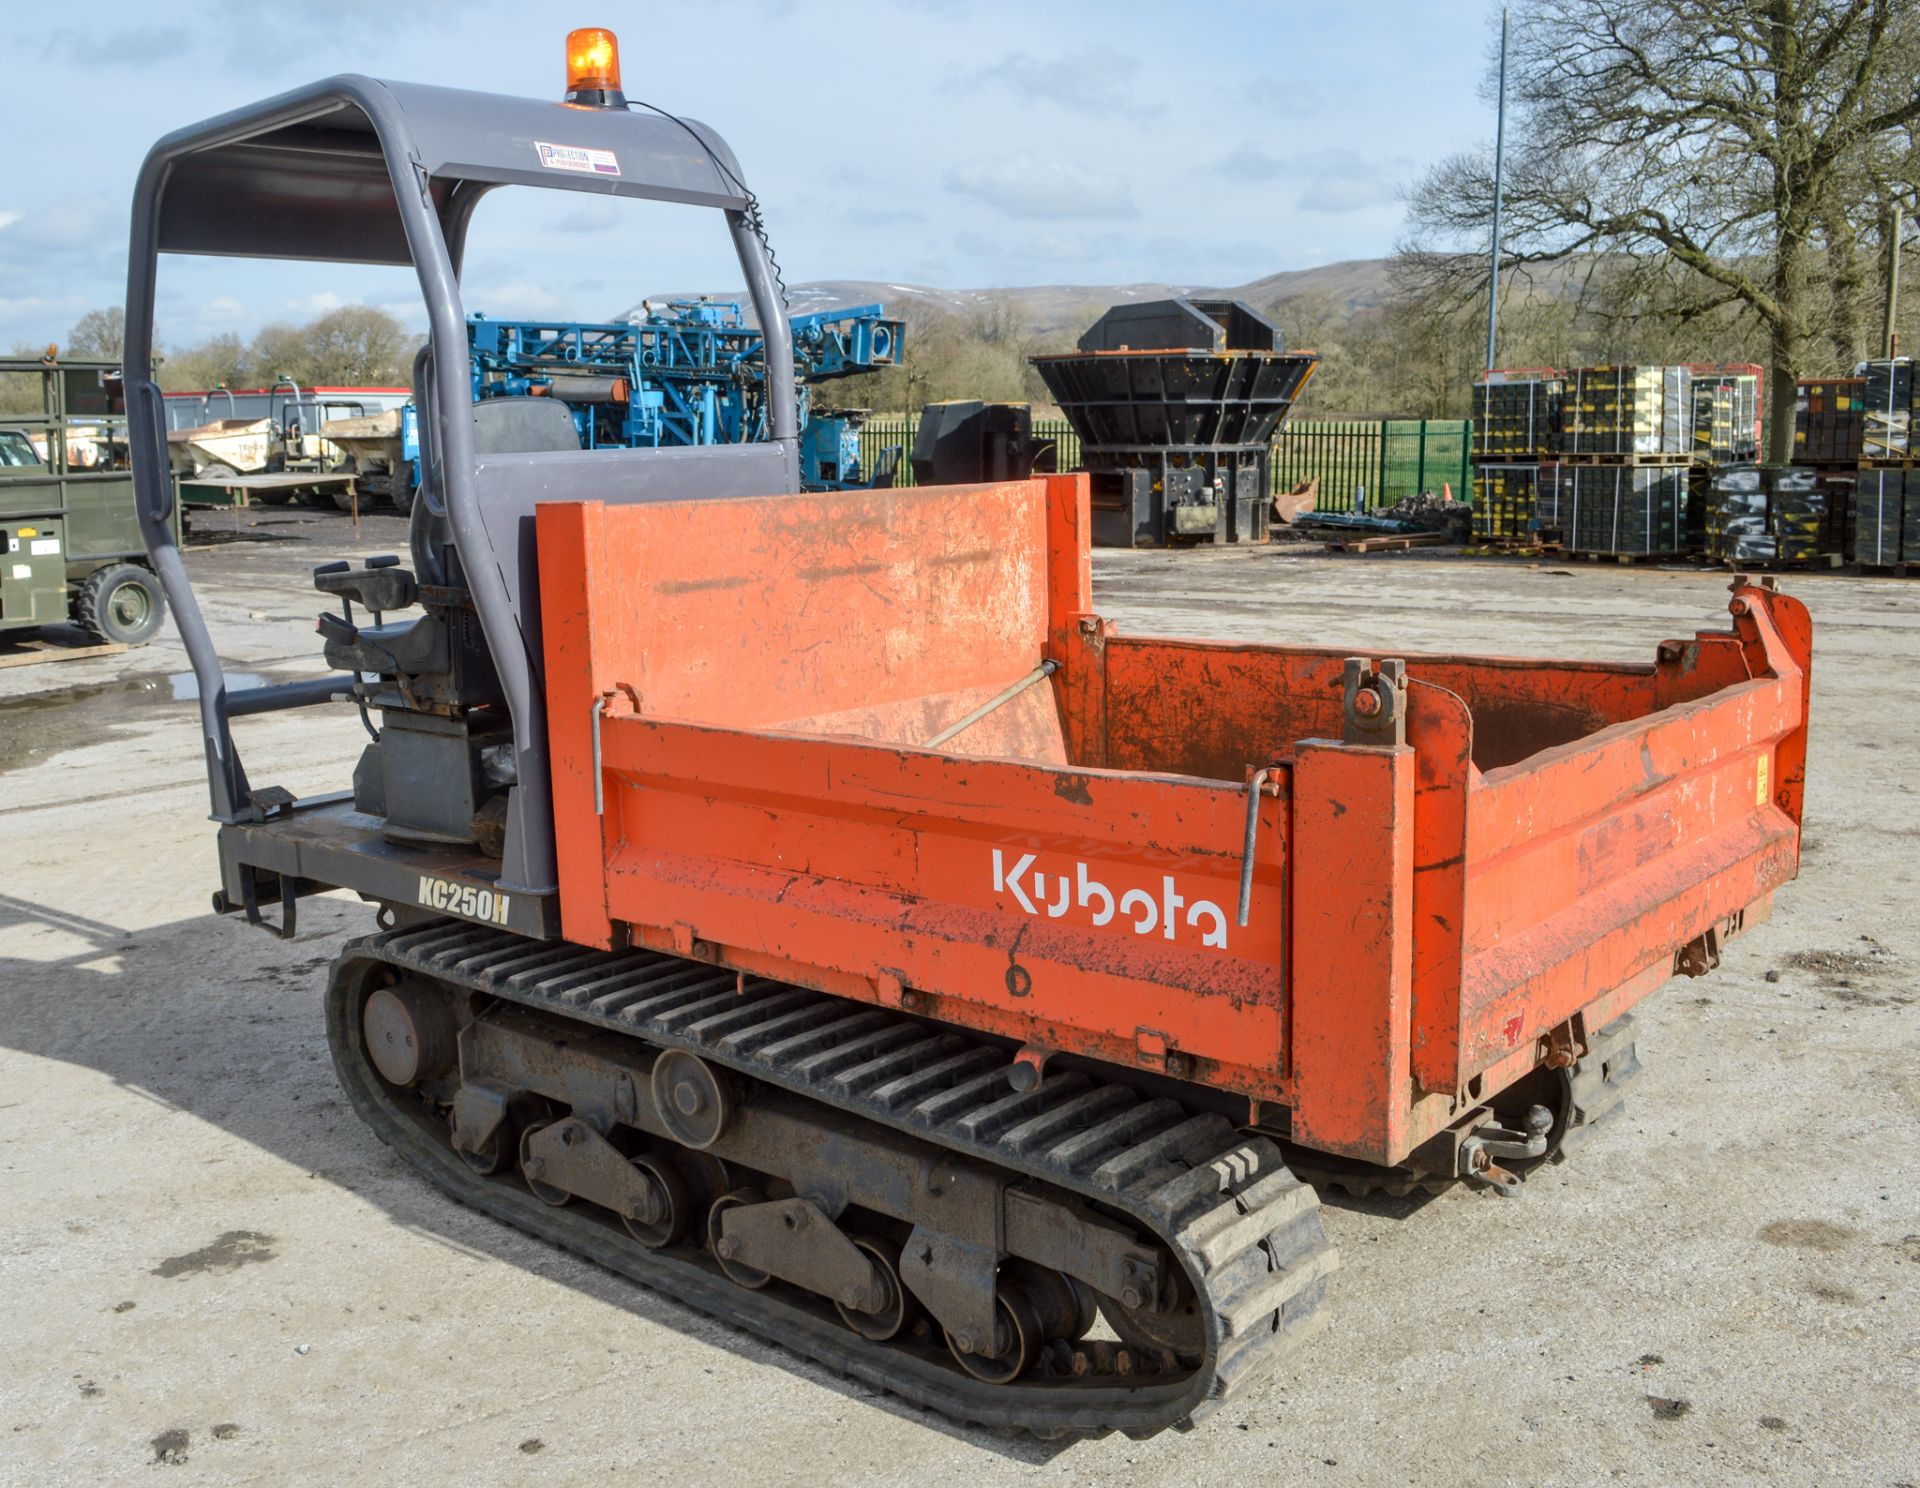 Kubota KC250H 2.5 tonne rubber tracked dumper Year: 2009 S/N: 10025 Recorded Hours: 1184 D331 - Image 4 of 9